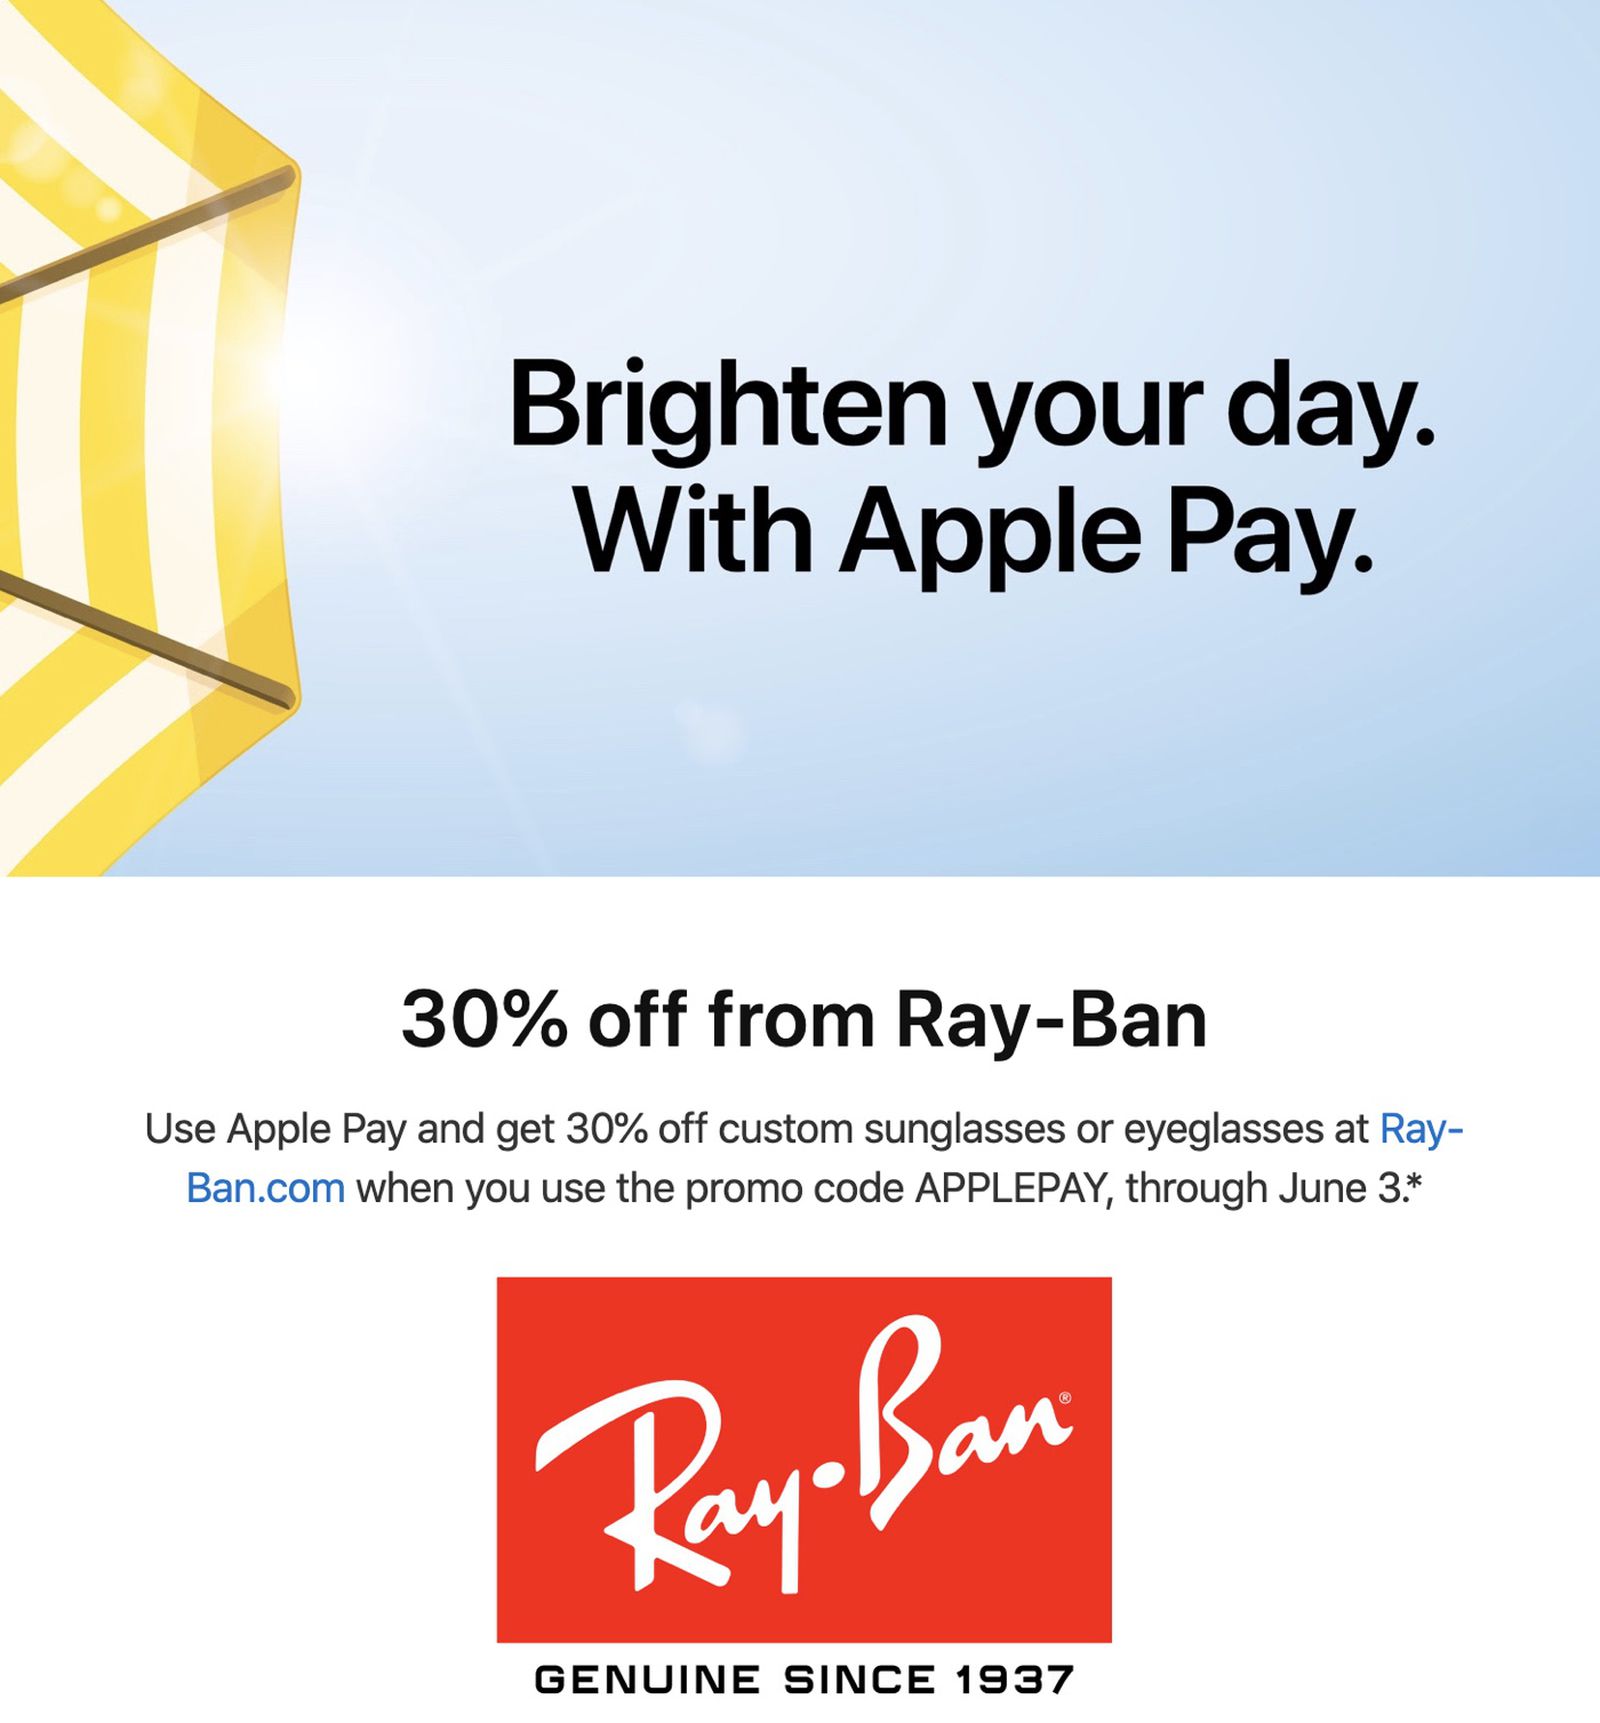 tofu carpet Collision course Apple Pay Promo Offers 30% Discount From Ray-Ban - MacRumors